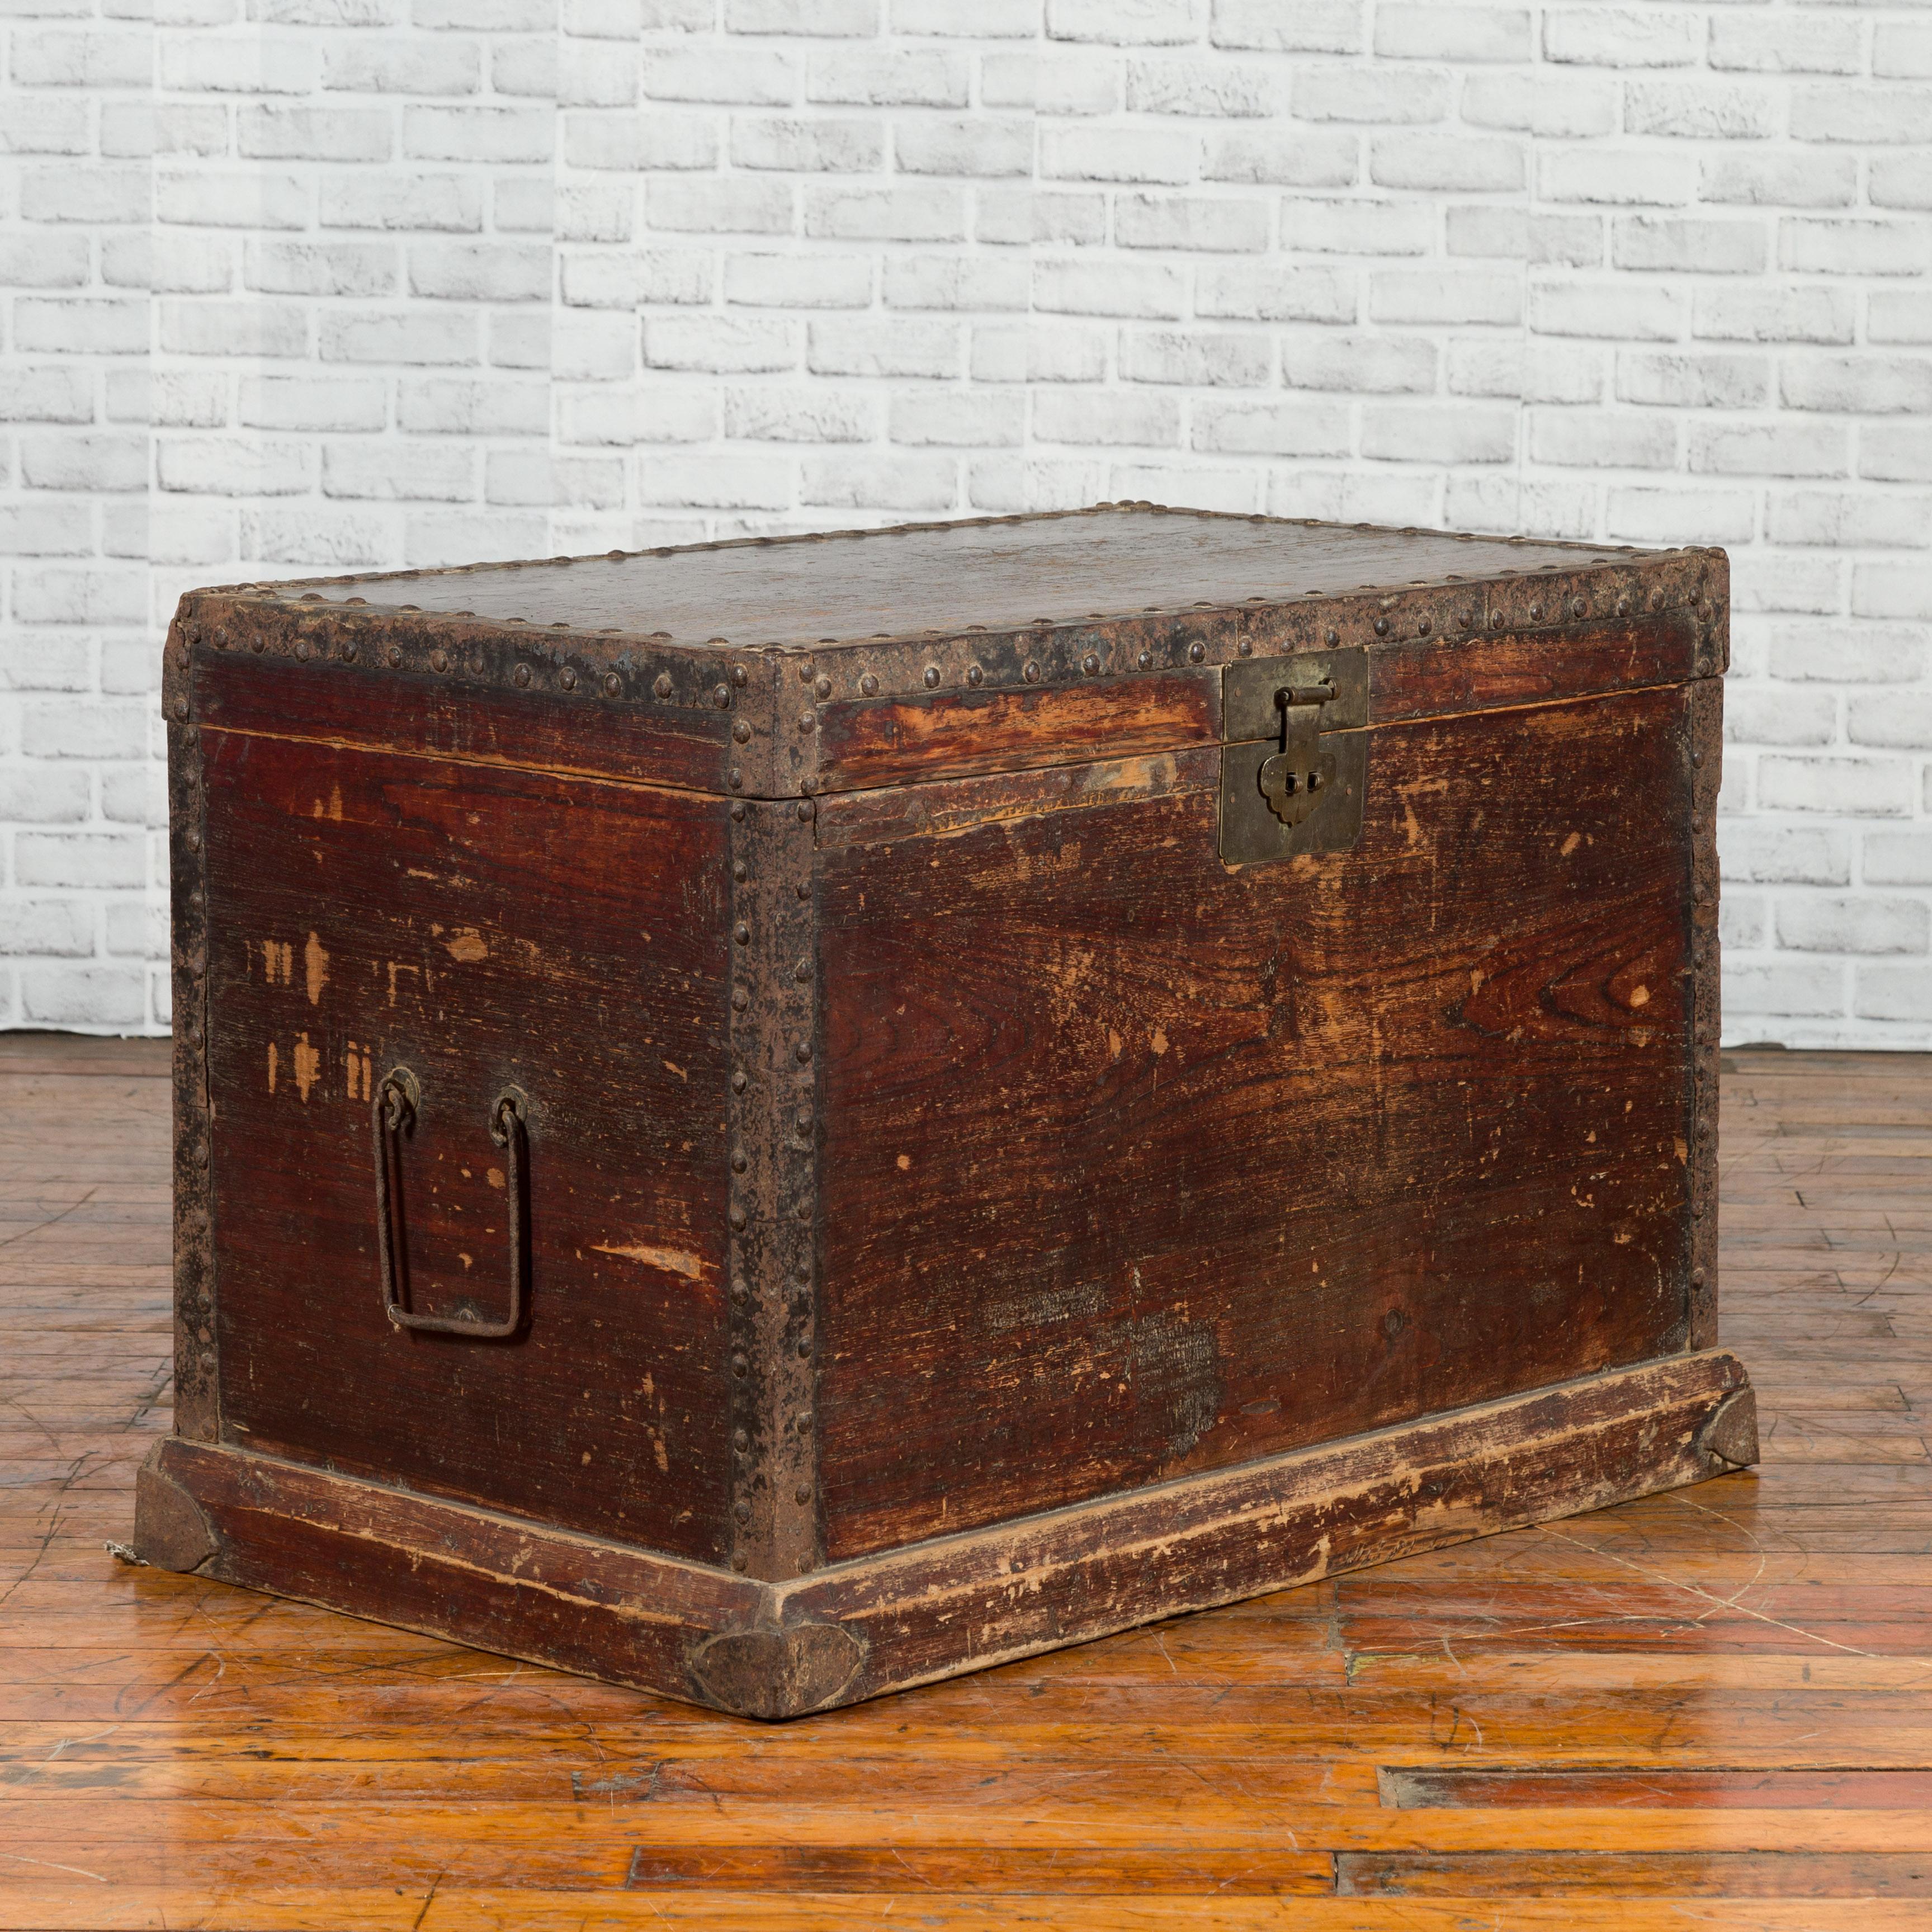 Chinese Qing Dynasty 19th Century Distressed Blanket Chest with Iron Fittings In Good Condition For Sale In Yonkers, NY